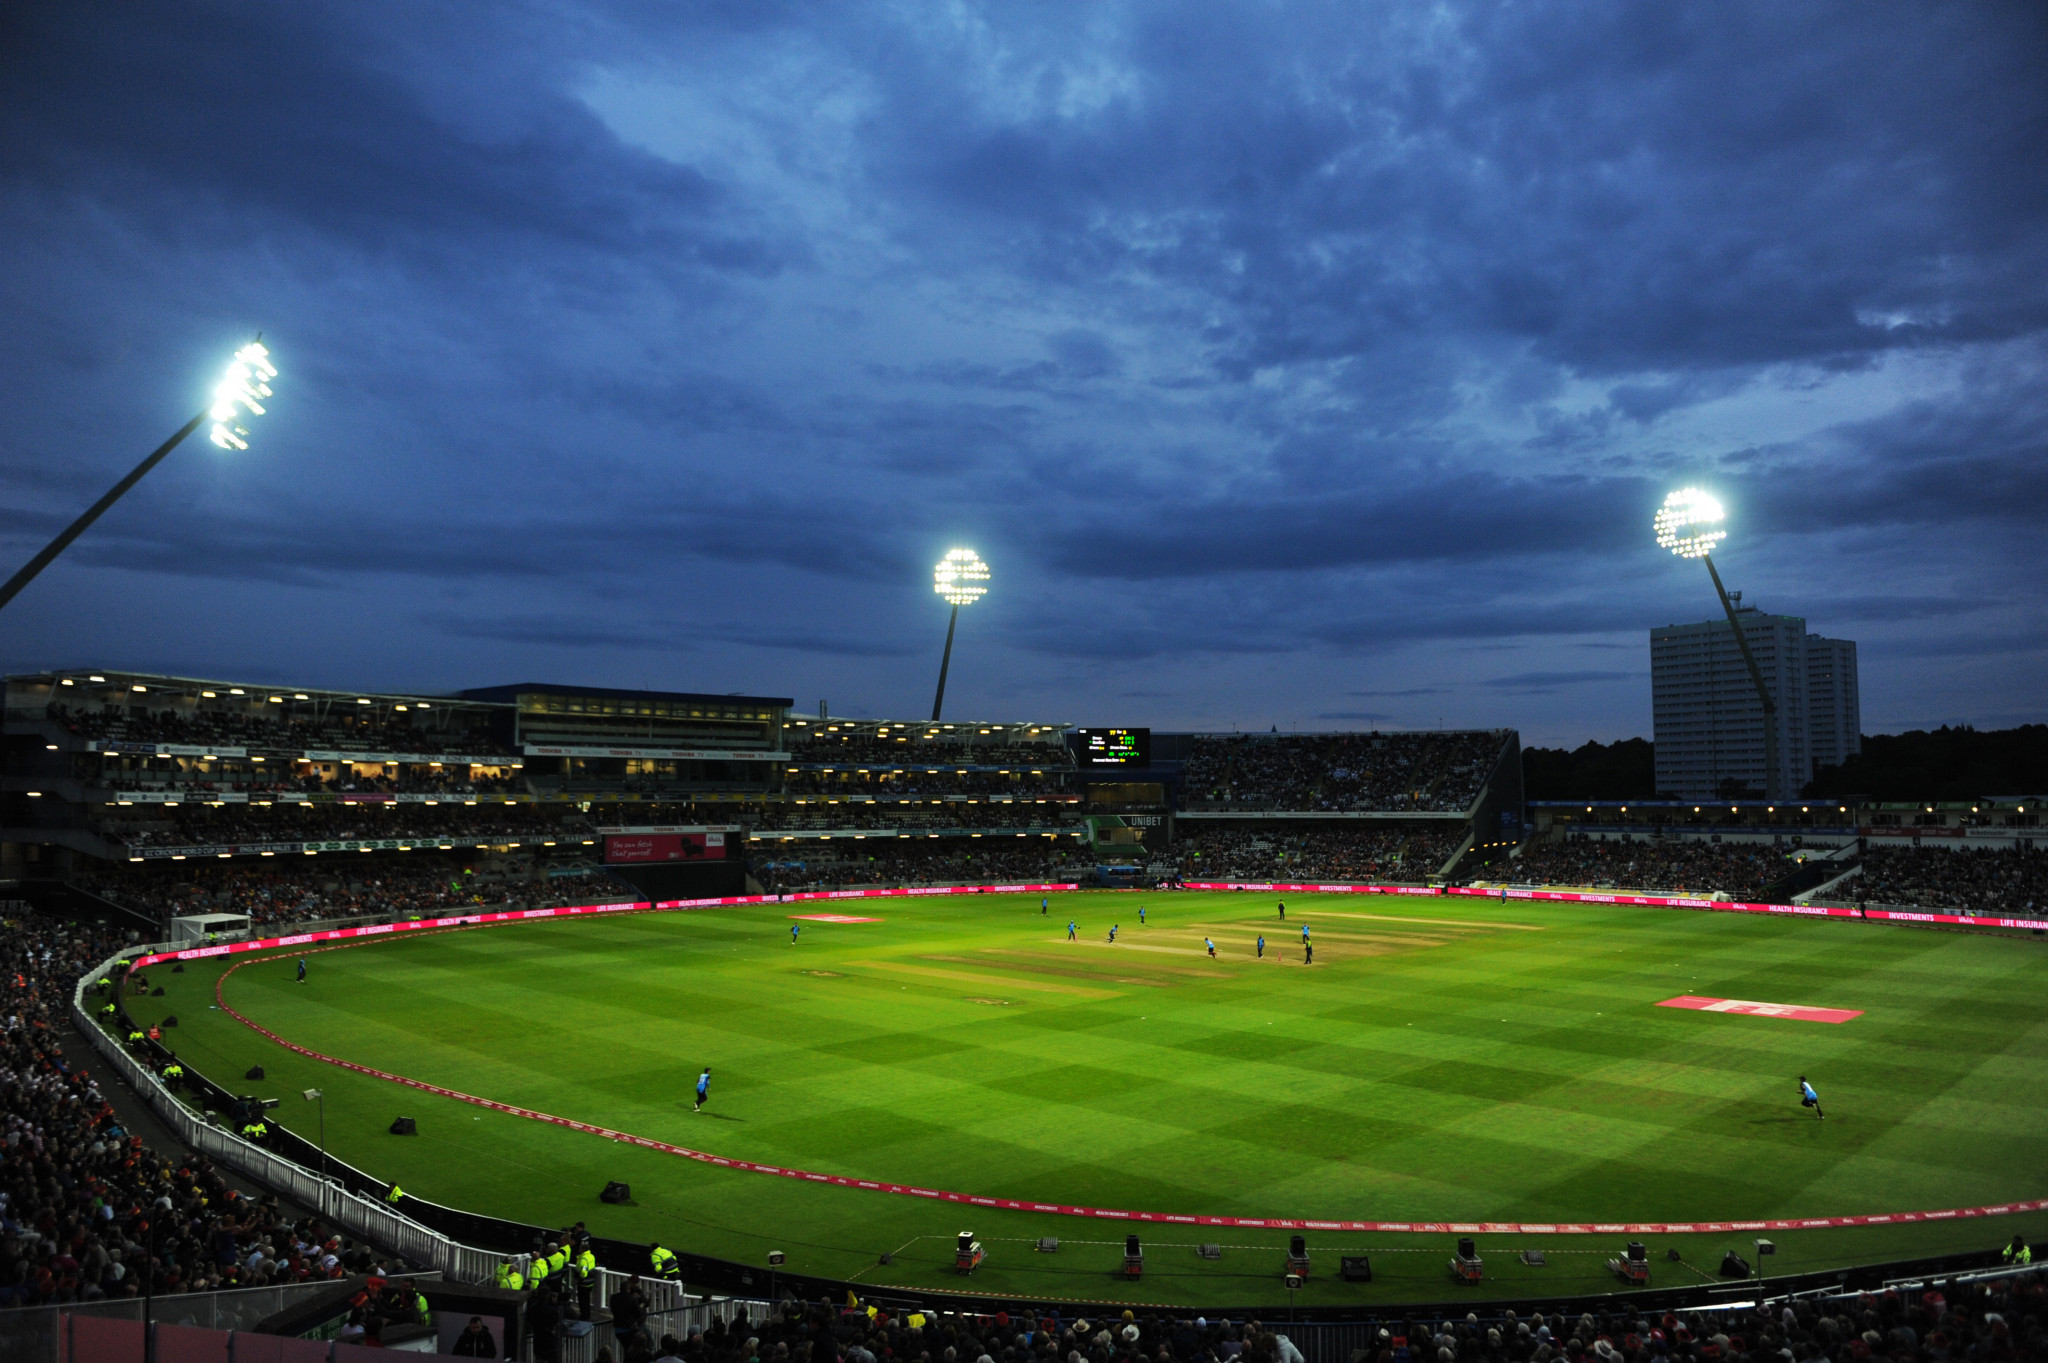 Women's cricket will be played at Edgbaston during the Birmingham 2022 Commonwealth Games ©Getty Images